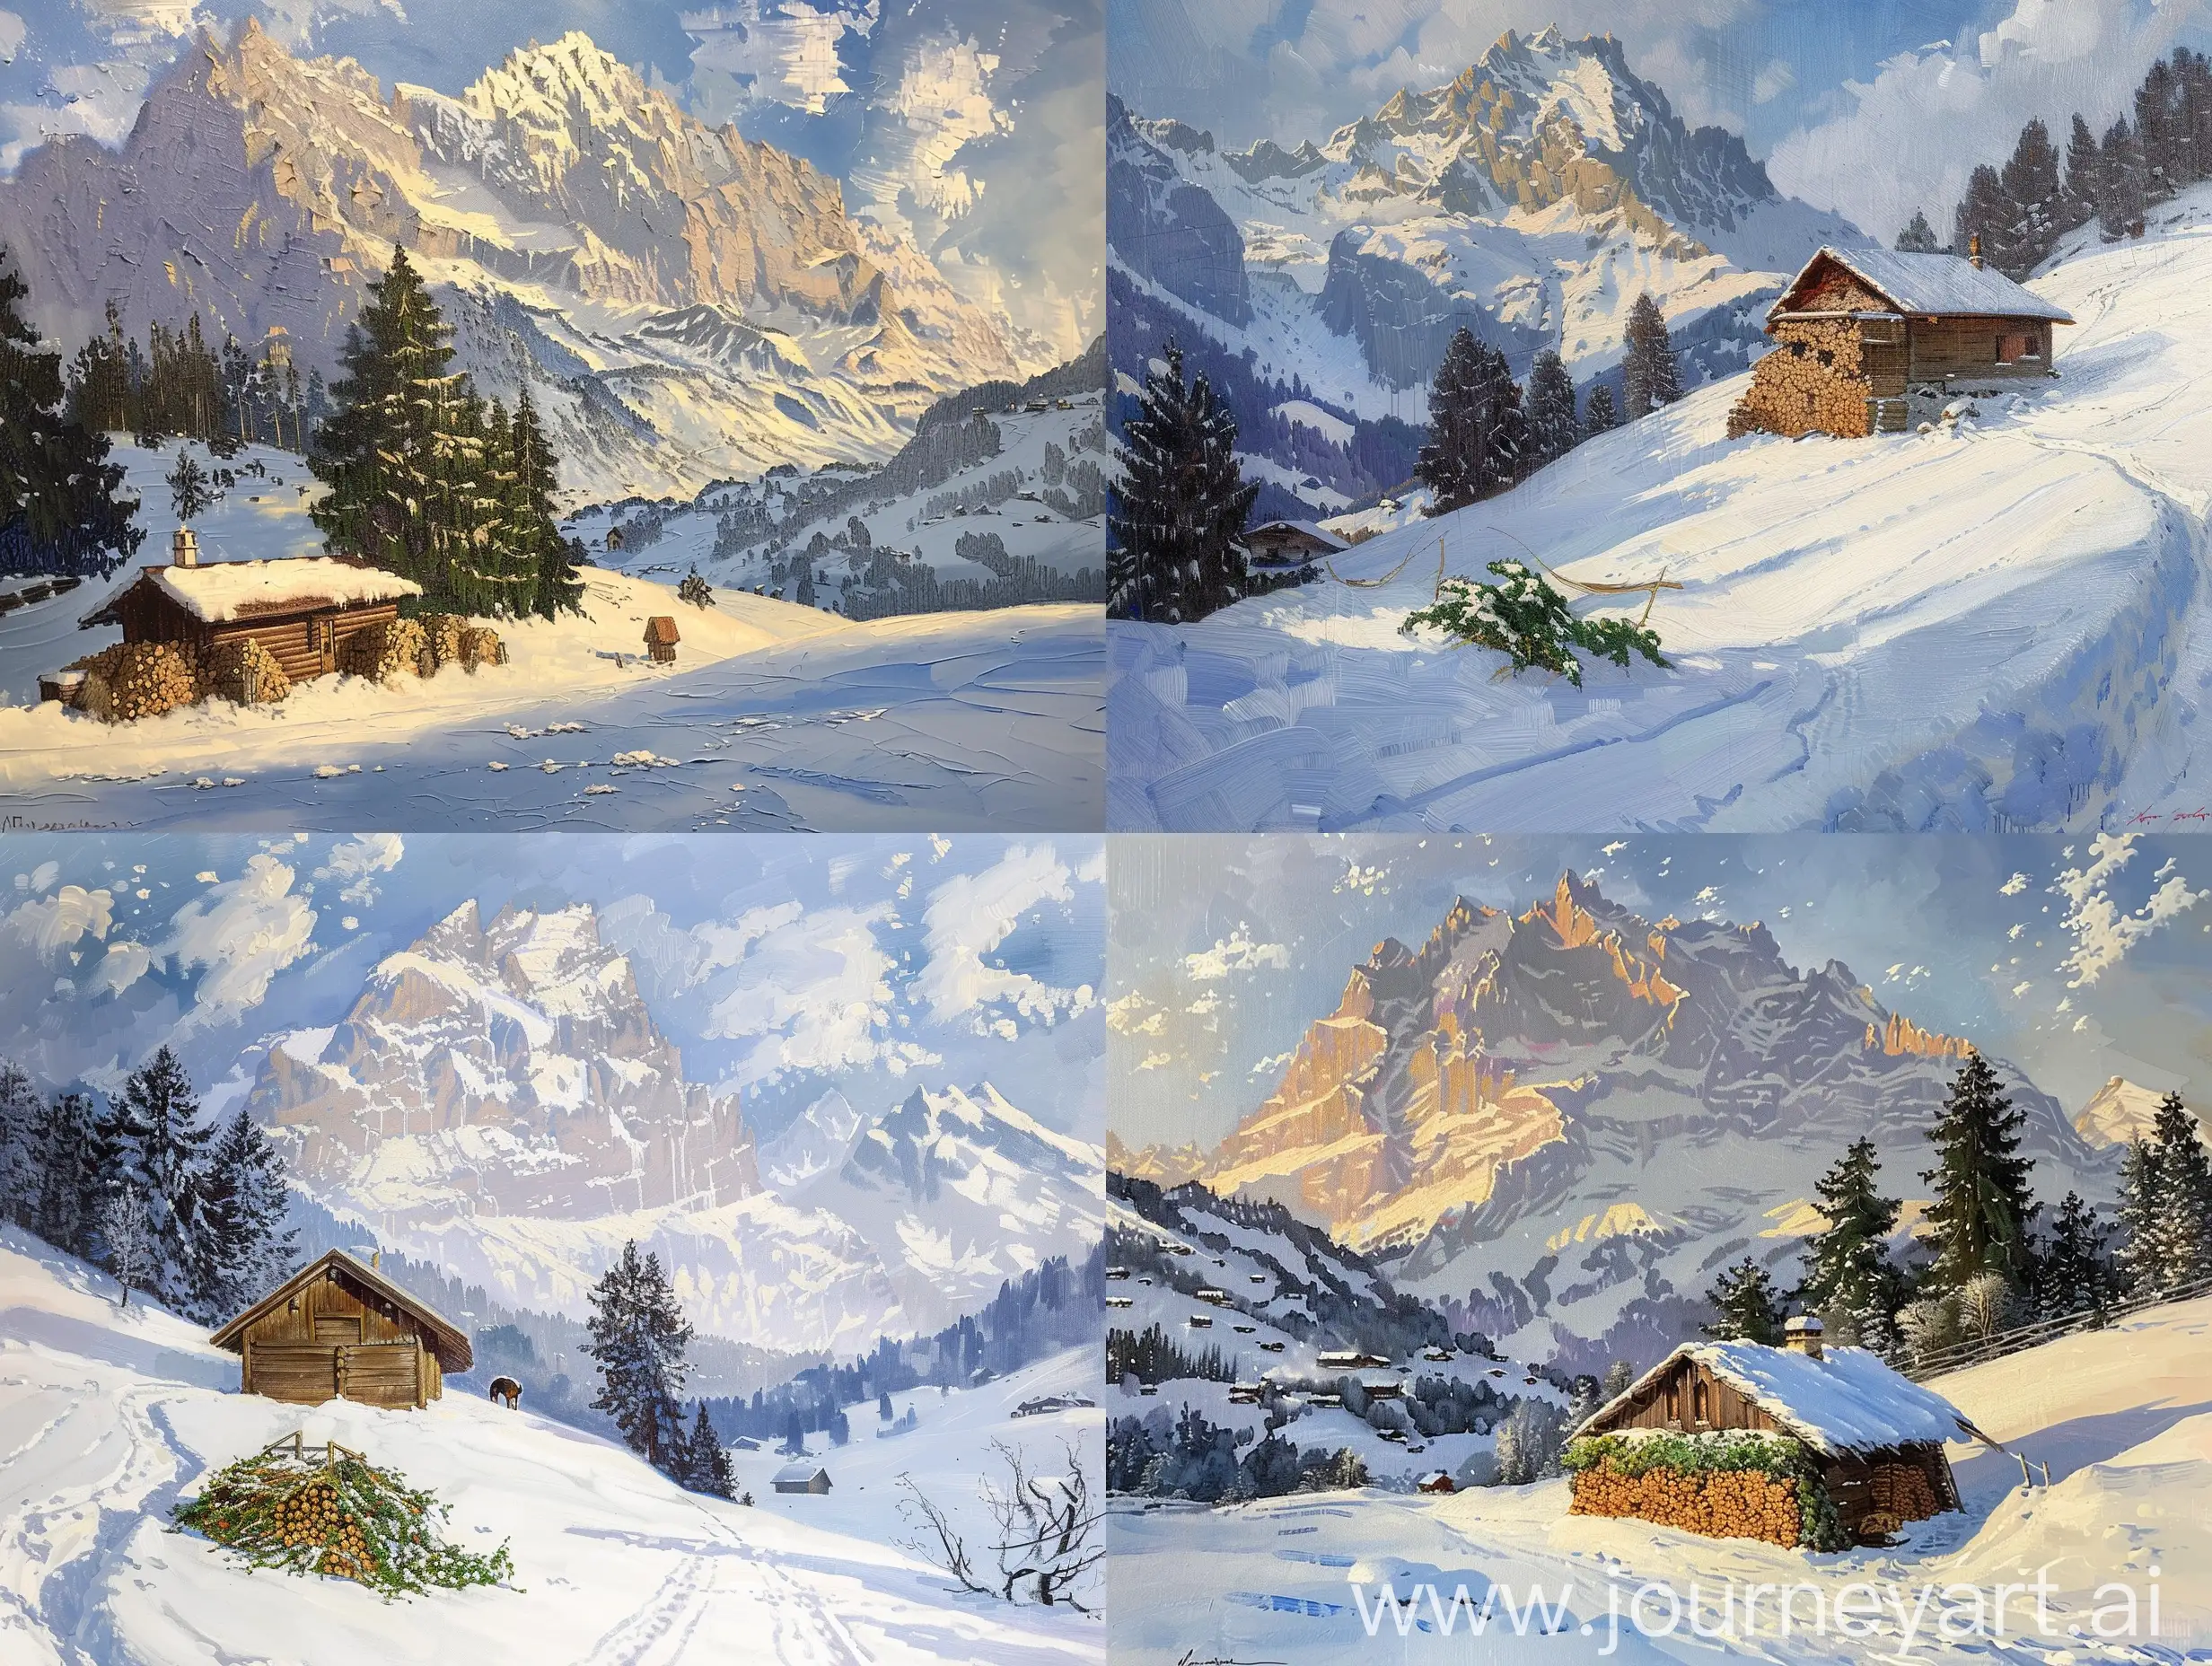 Snowy-Mountain-Hut-in-a-Serene-Oil-Painting-Landscape